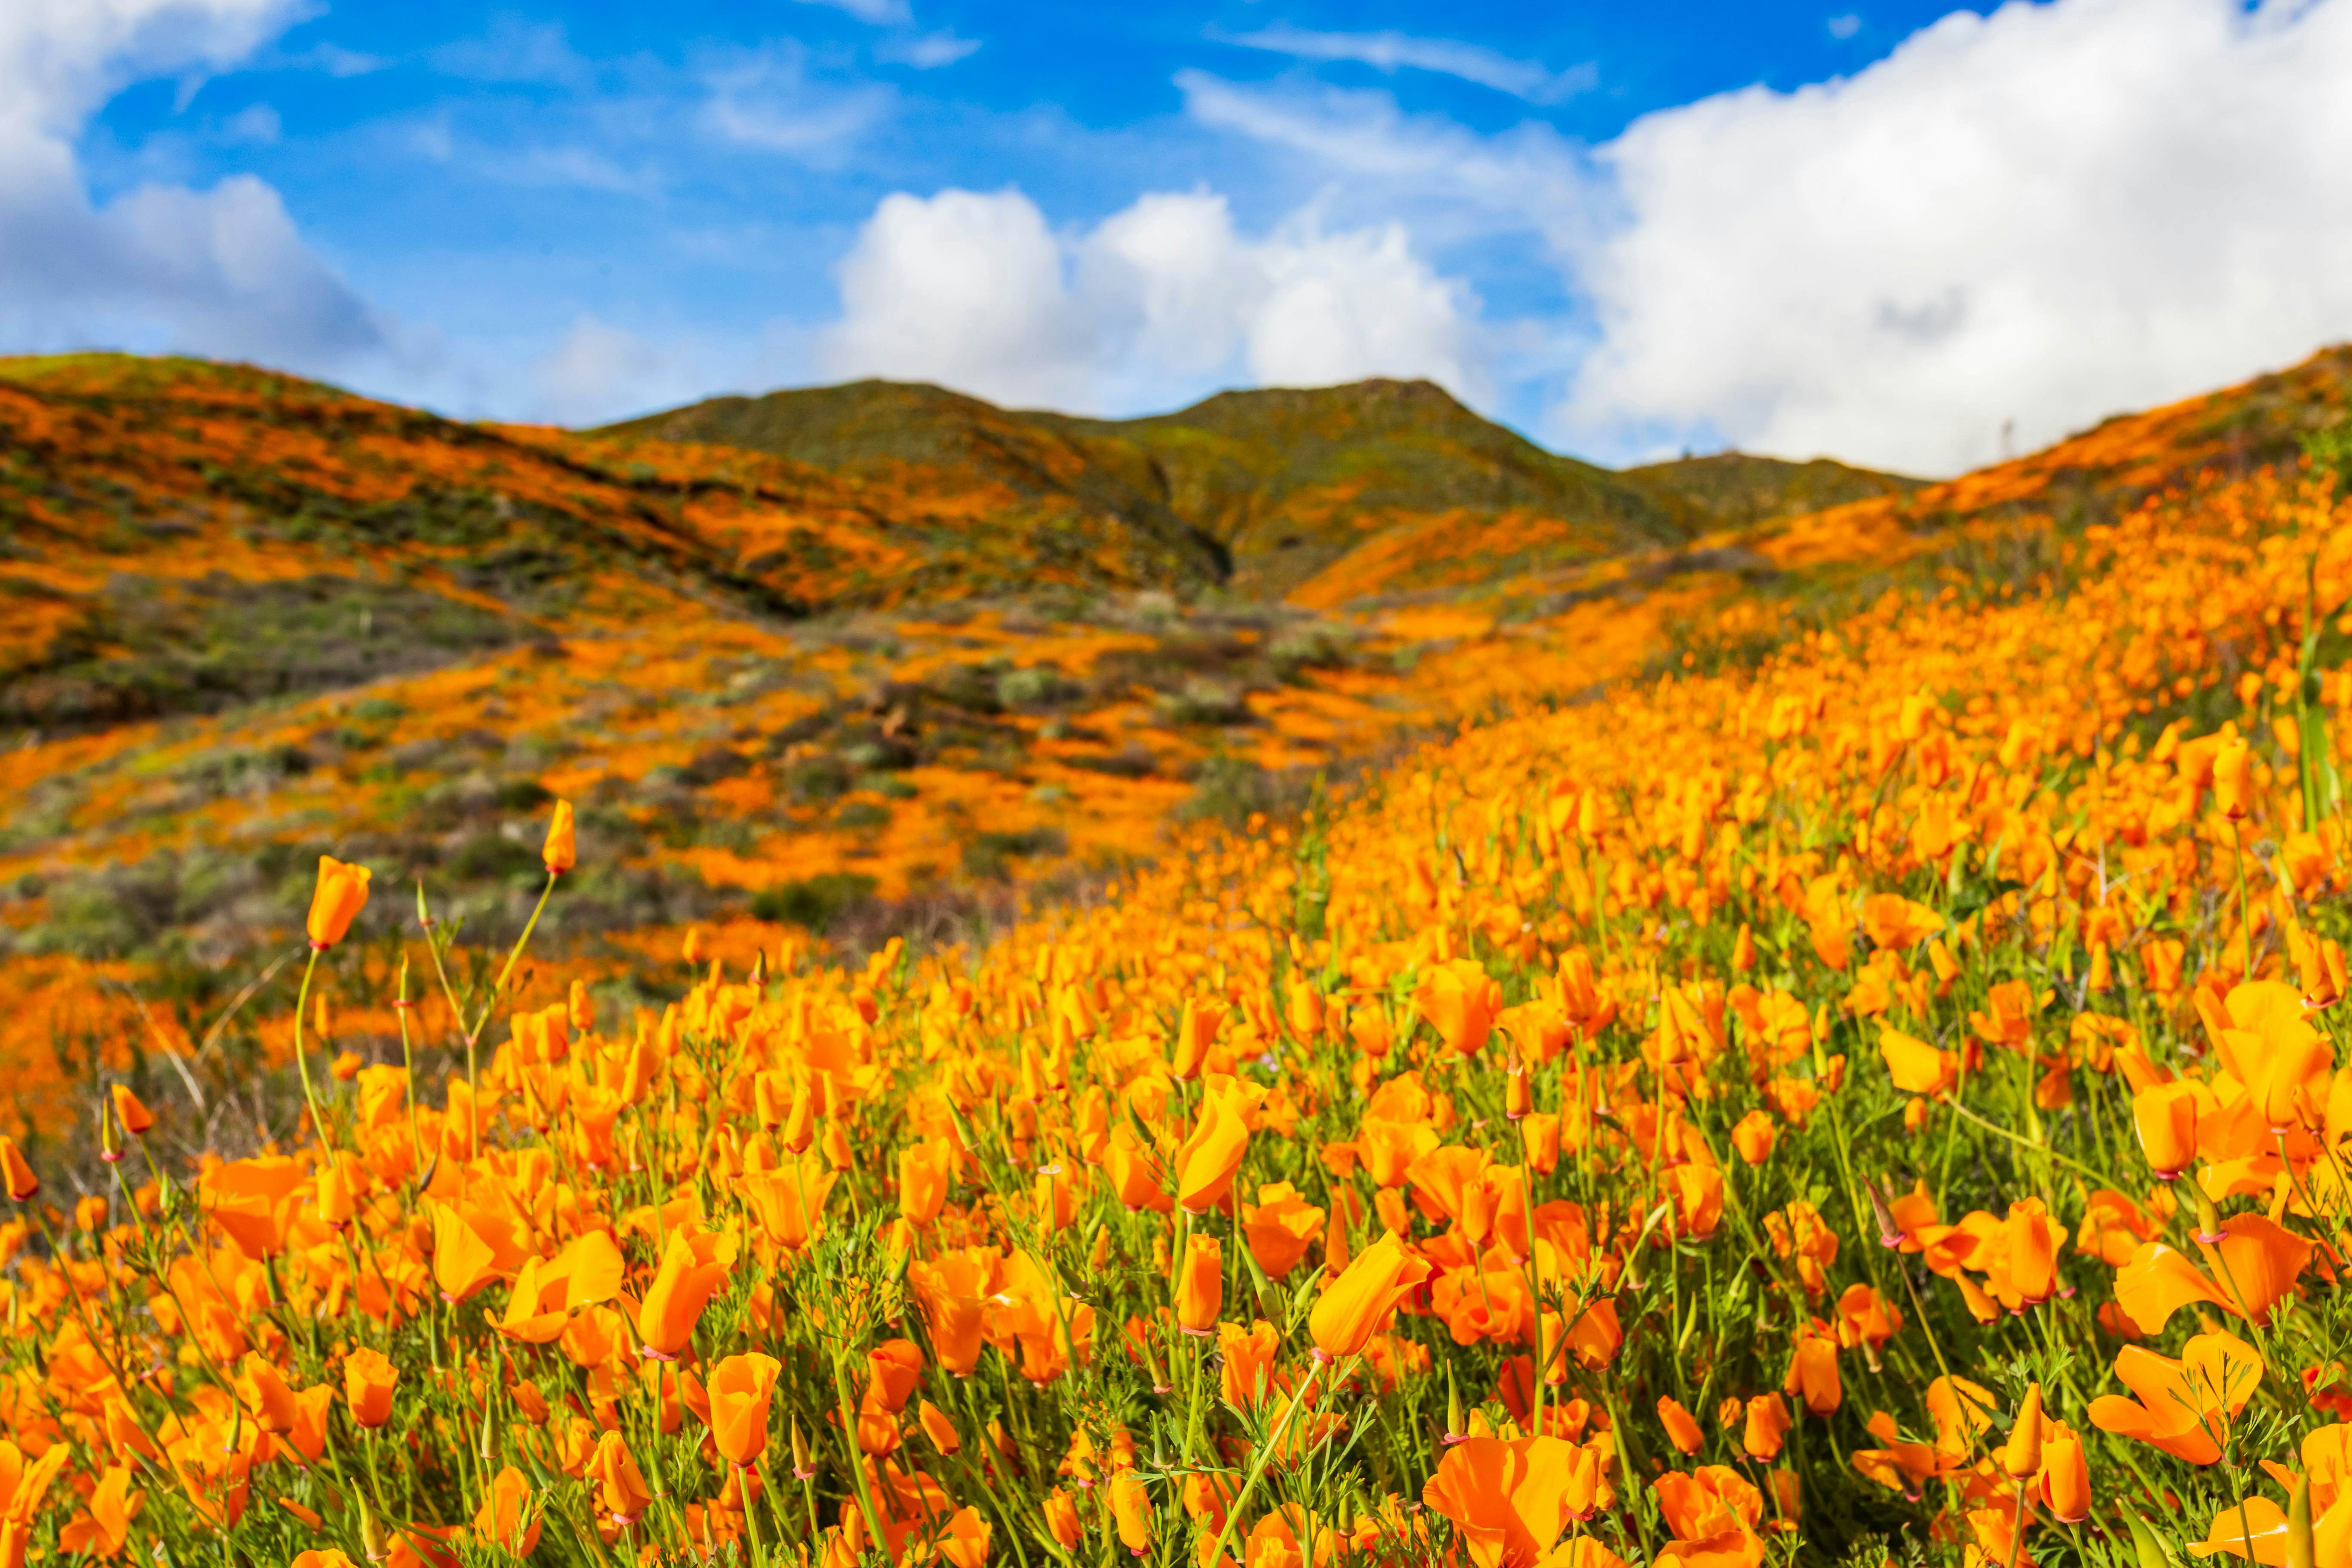 Where to See California Wildflowers This Spring